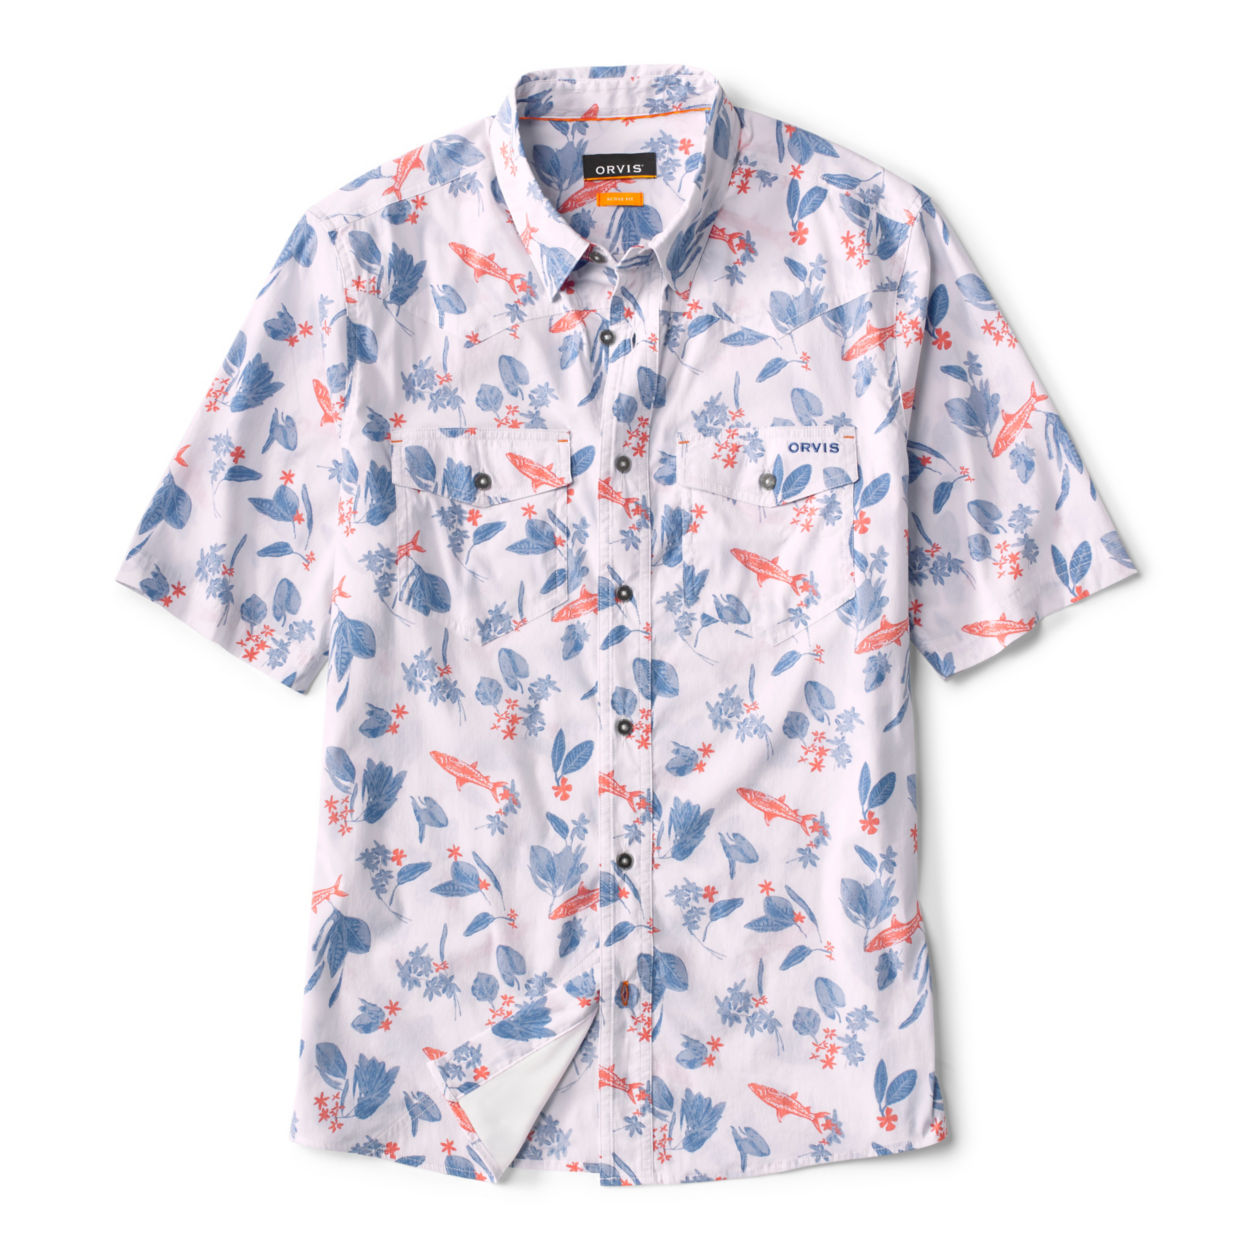 Men's Guide 2.0 Western Print Short-Sleeved Sun Protection Shirt River Delta Size Large Cotton/Nylon/Recycled Materials Orvis